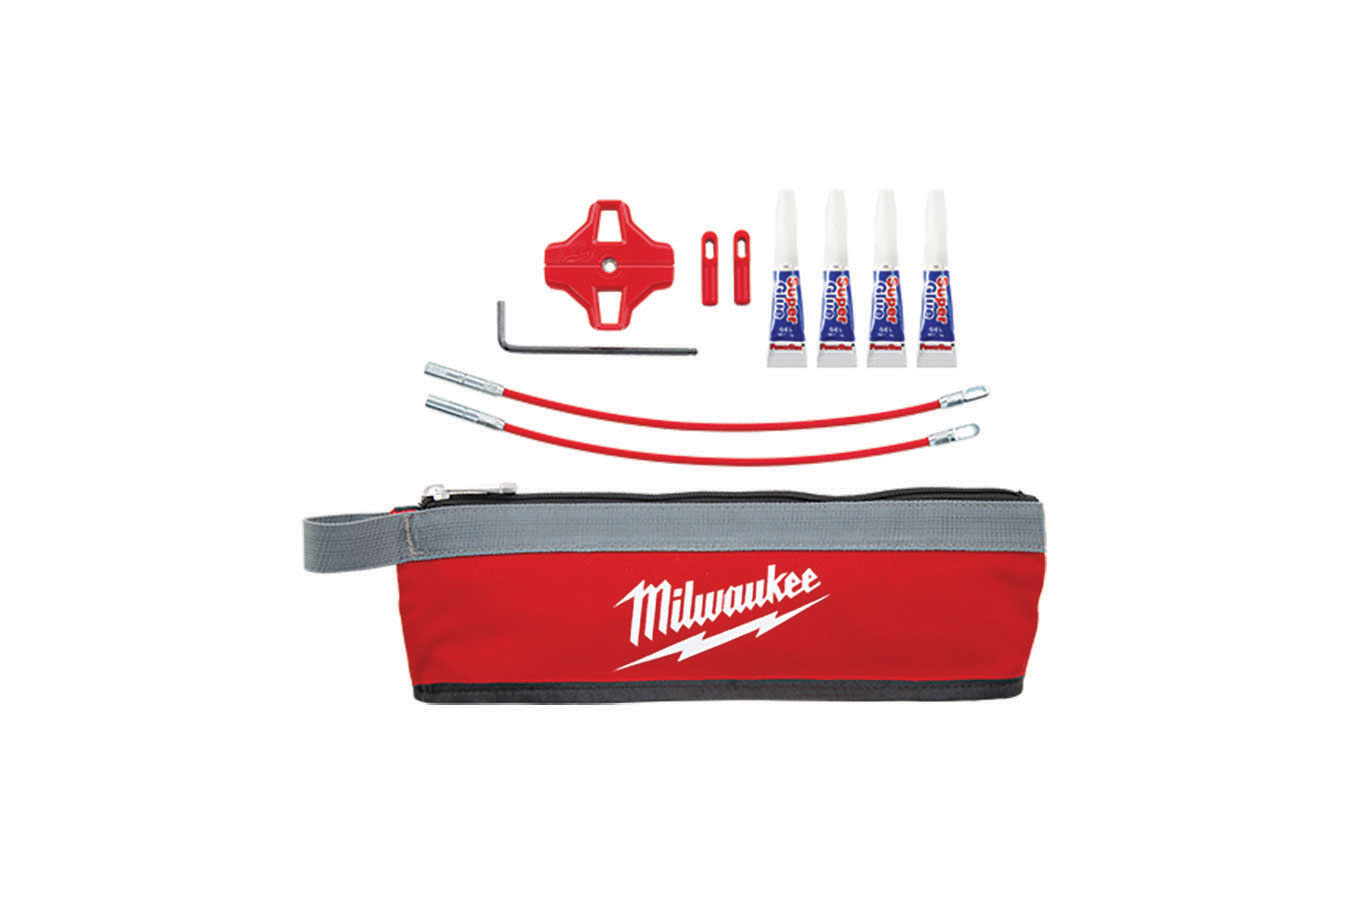 Red, blue and white threader, two nonconducive tips, two swiveling and flexible metal leaders, four tubes of adhesive, a hex key and a bag with the Milwaukee logo. Image by Milwaukee Tool.